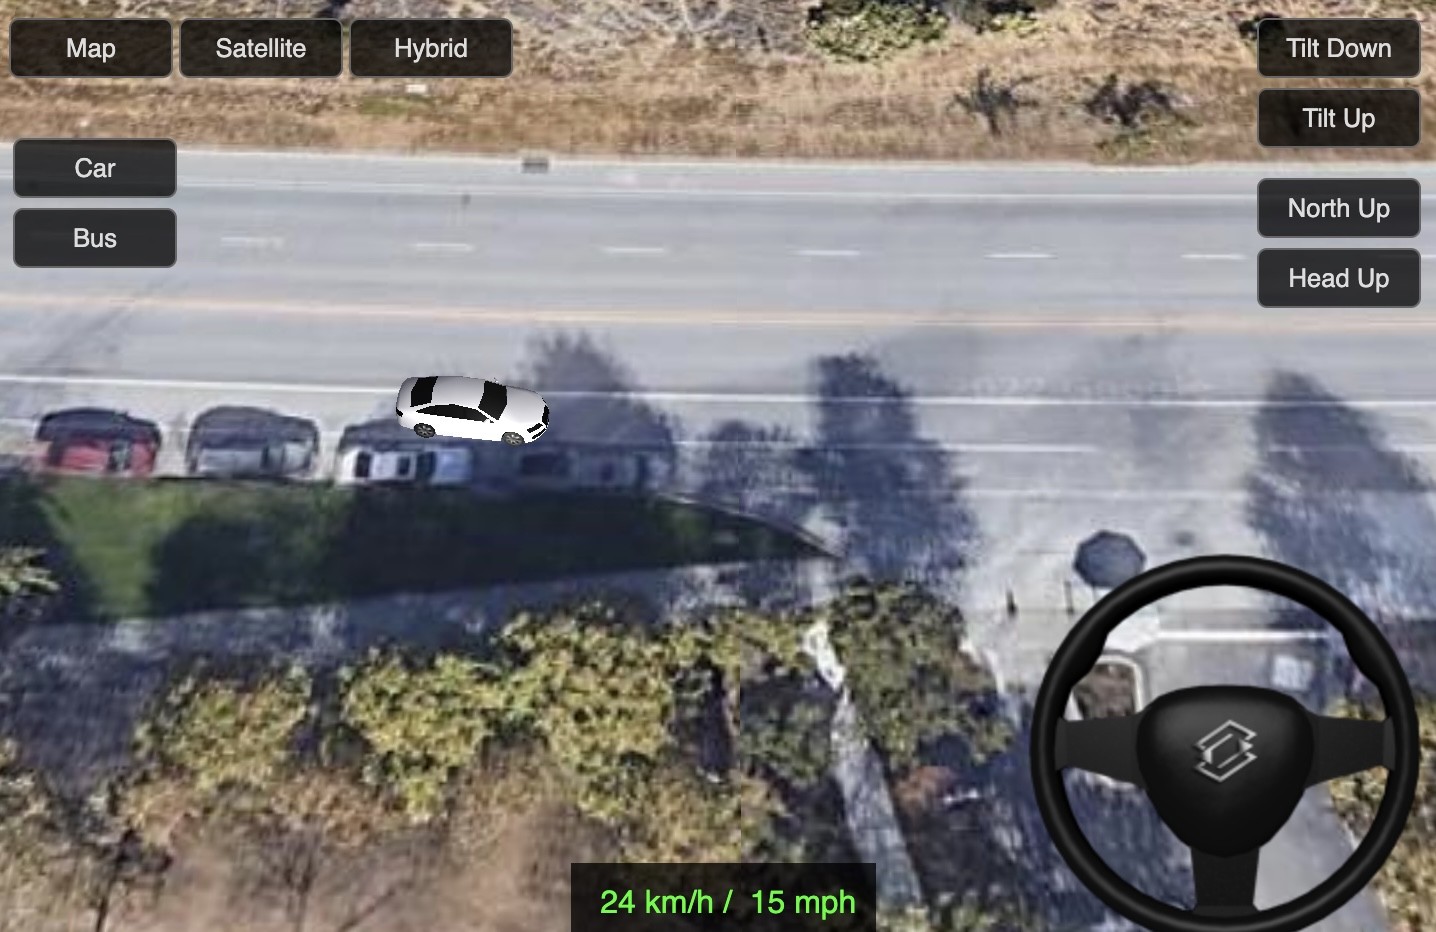 Car Driving Game on Google Maps 